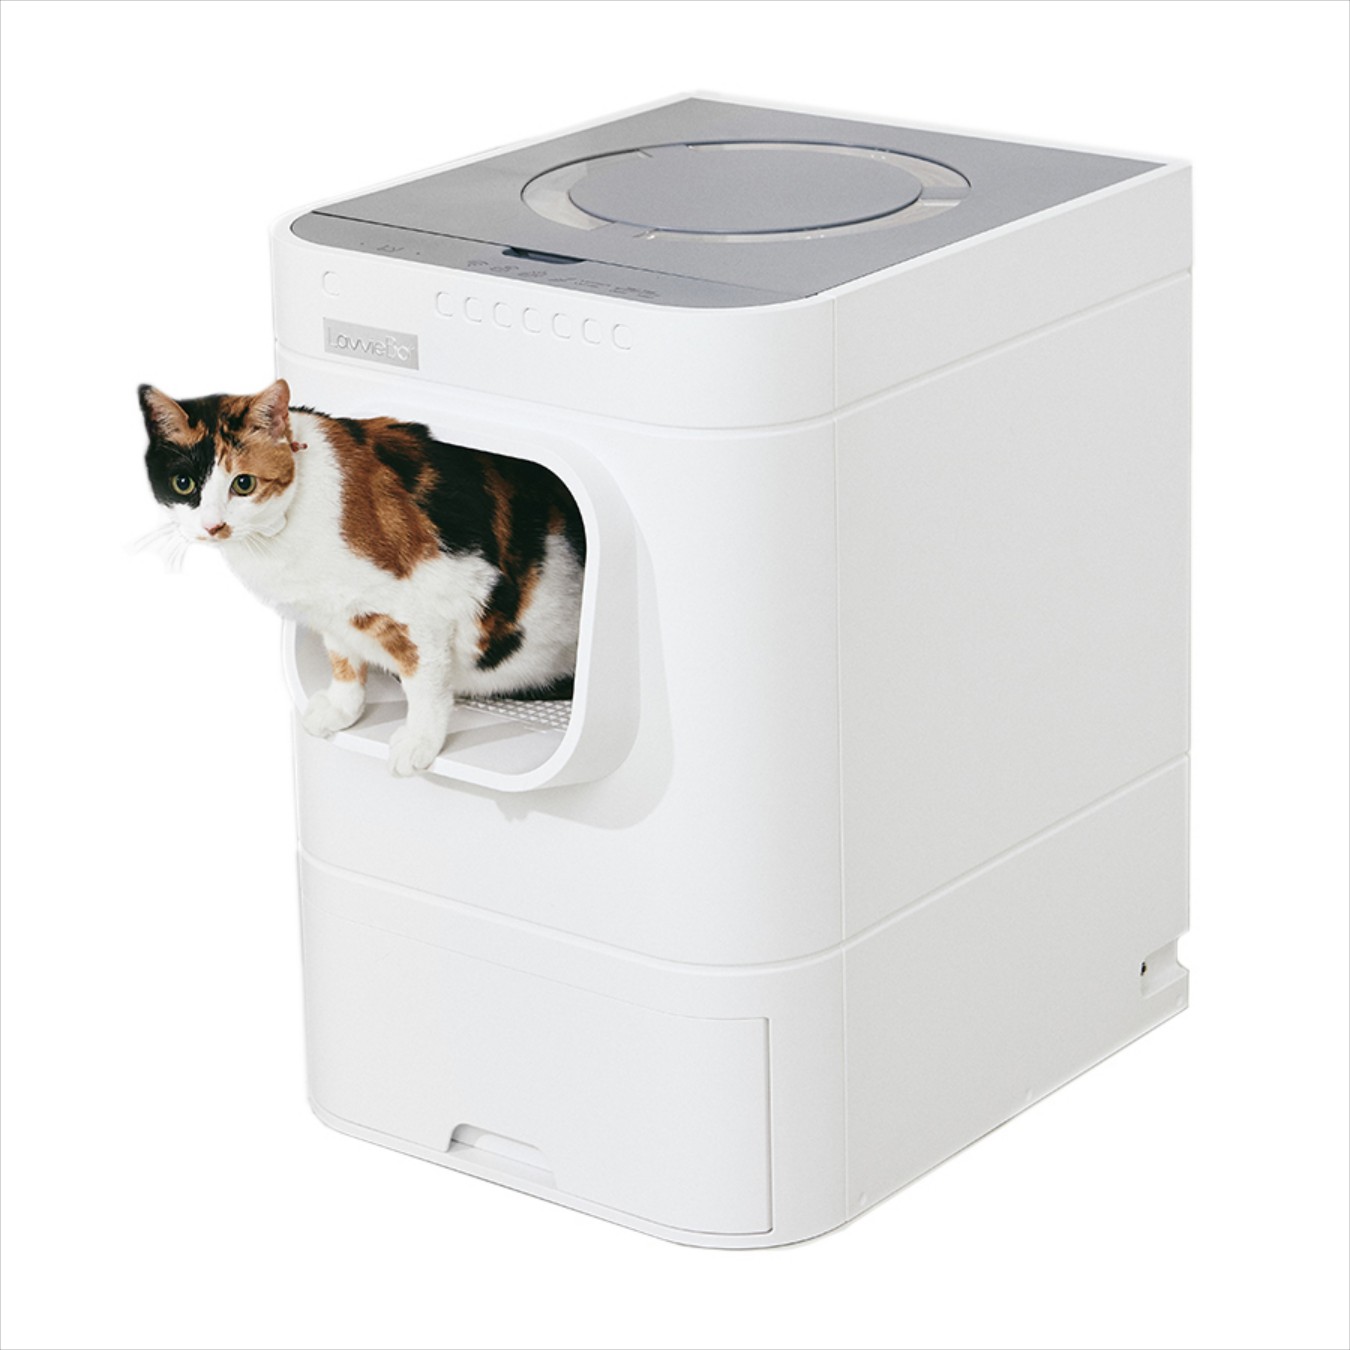 Lavviebot S Self-Cleaning Litter Box - Smart Features